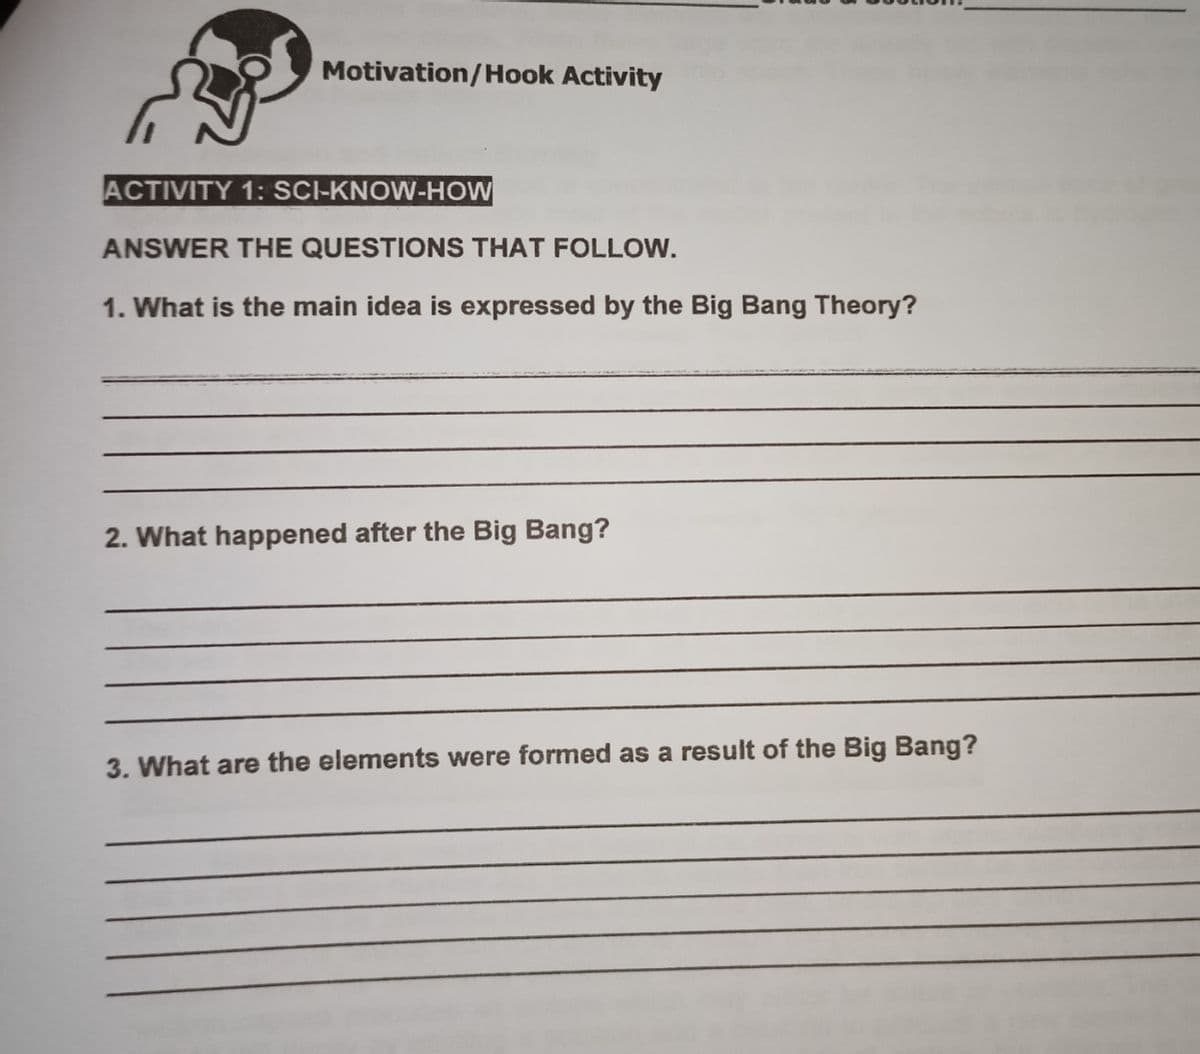 Motivation/Hook Activity
ACTIVITY 1: SCI-KNOW-HOW
ANSWER THE QUESTIONS THAT FOLLOW.
1. What is the main idea is expressed by the Big Bang Theory?
2. What happened after the Big Bang?
3. What are the elements were formed as a result of the Big Bang?
